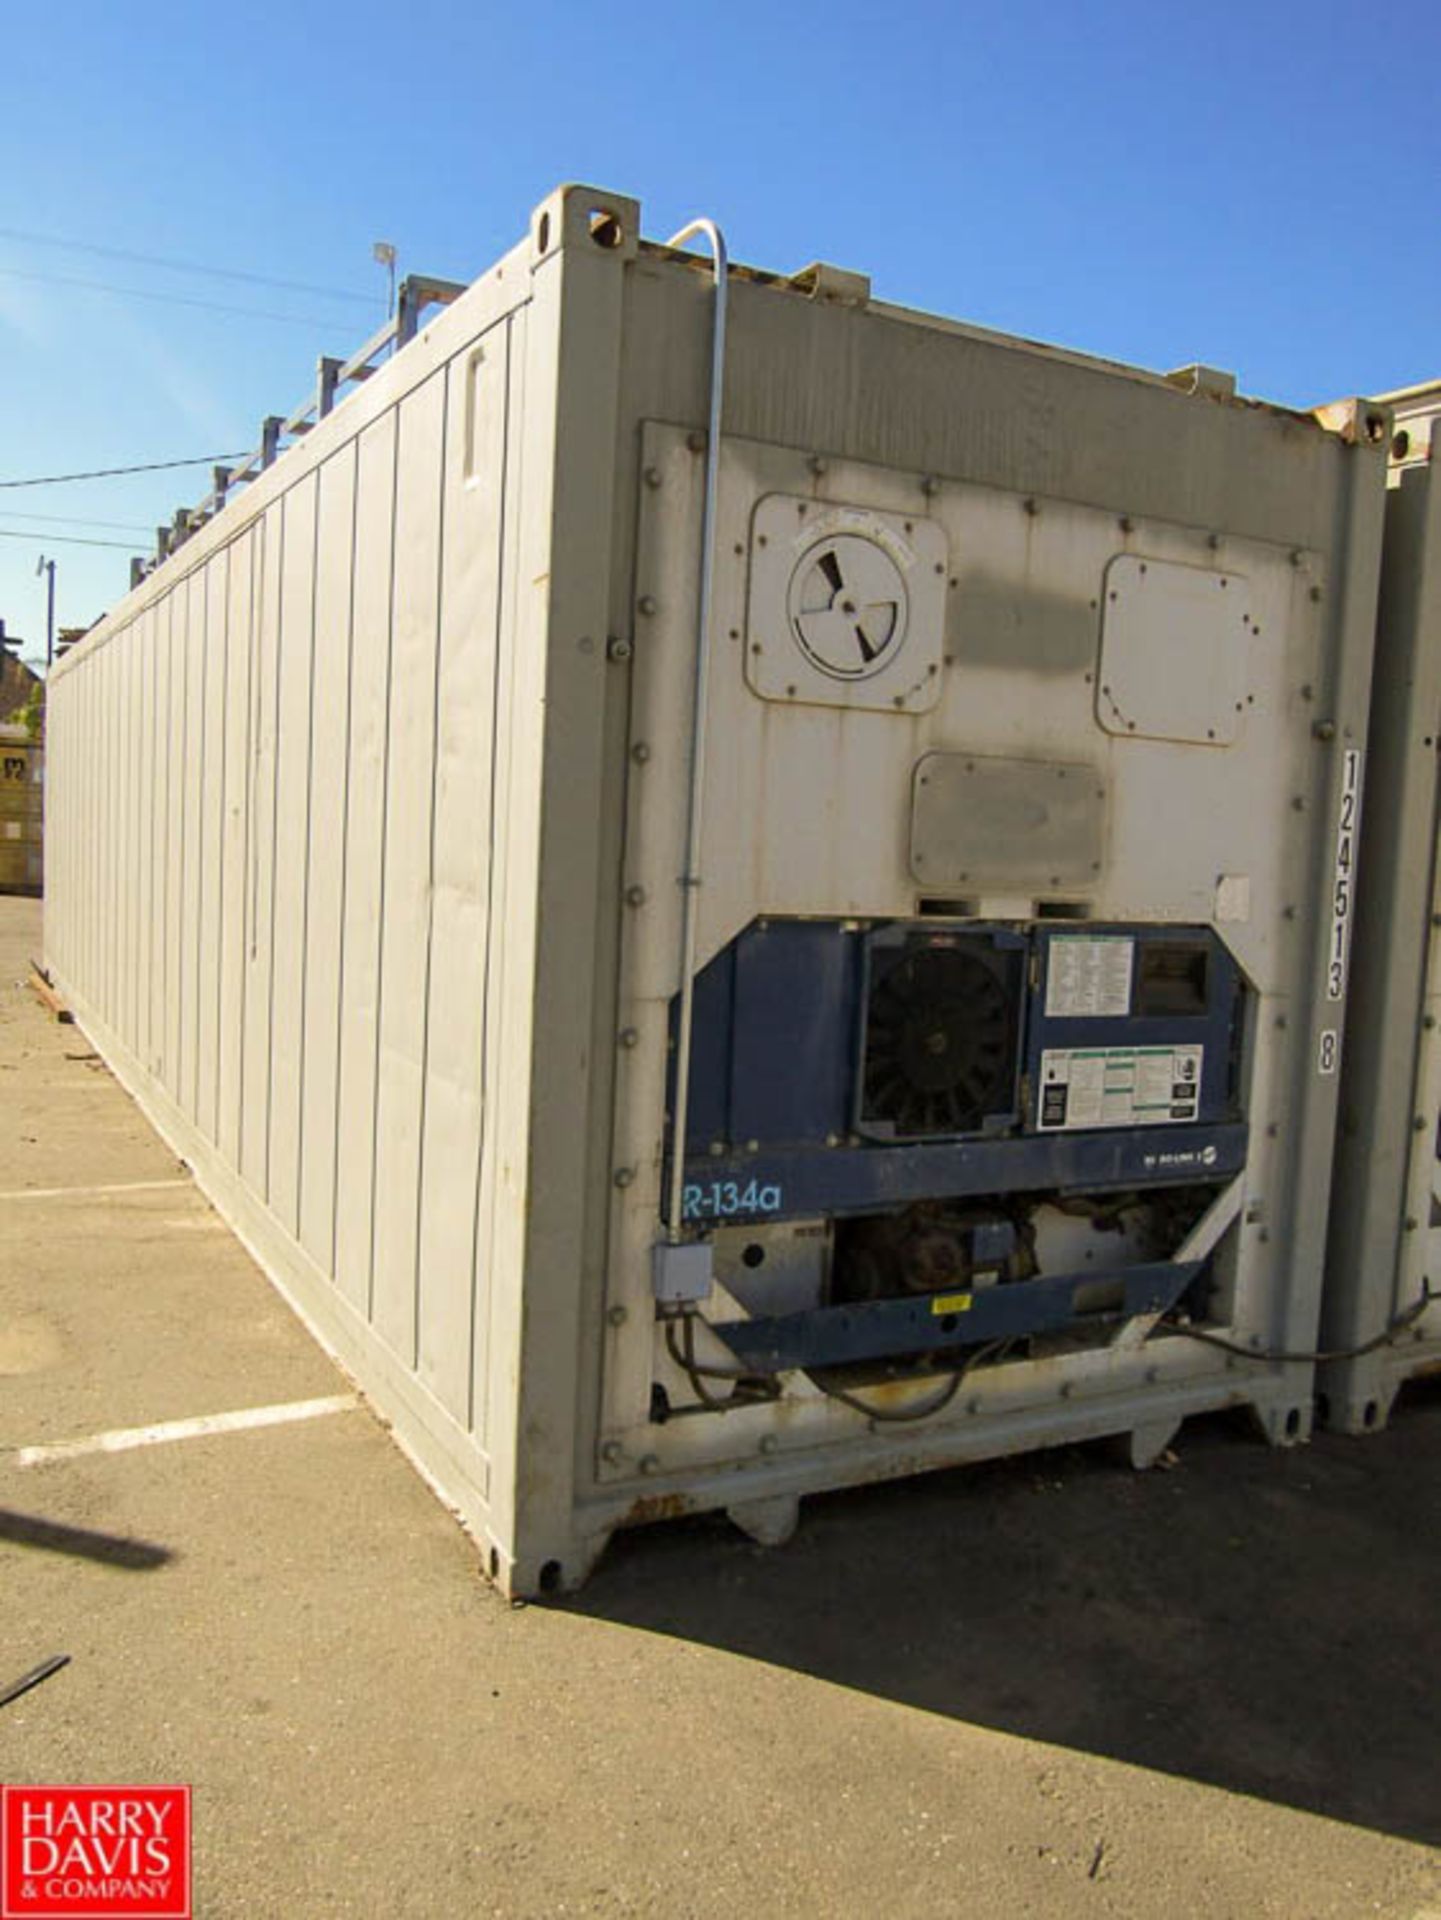 2004 CIMC 40' Shipping Container Dimensions = 40' x 8' x 9' 34 000kg/74 960lb Max Gross Weight 216 - Image 2 of 9